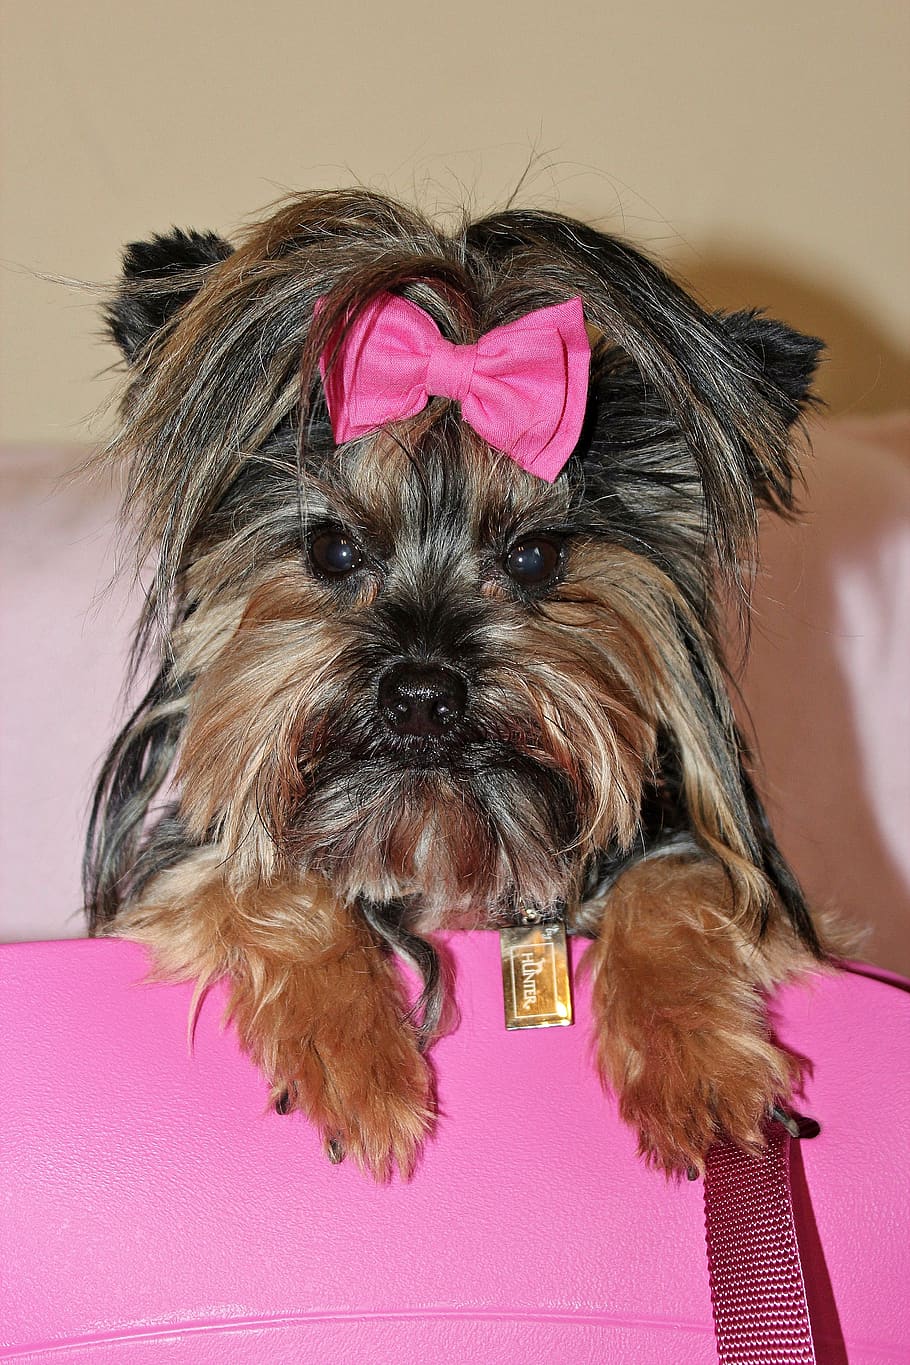 yorkshire terrier, dog, beauty, pink, bow, pink color, one animal, canine, domestic animals, pets